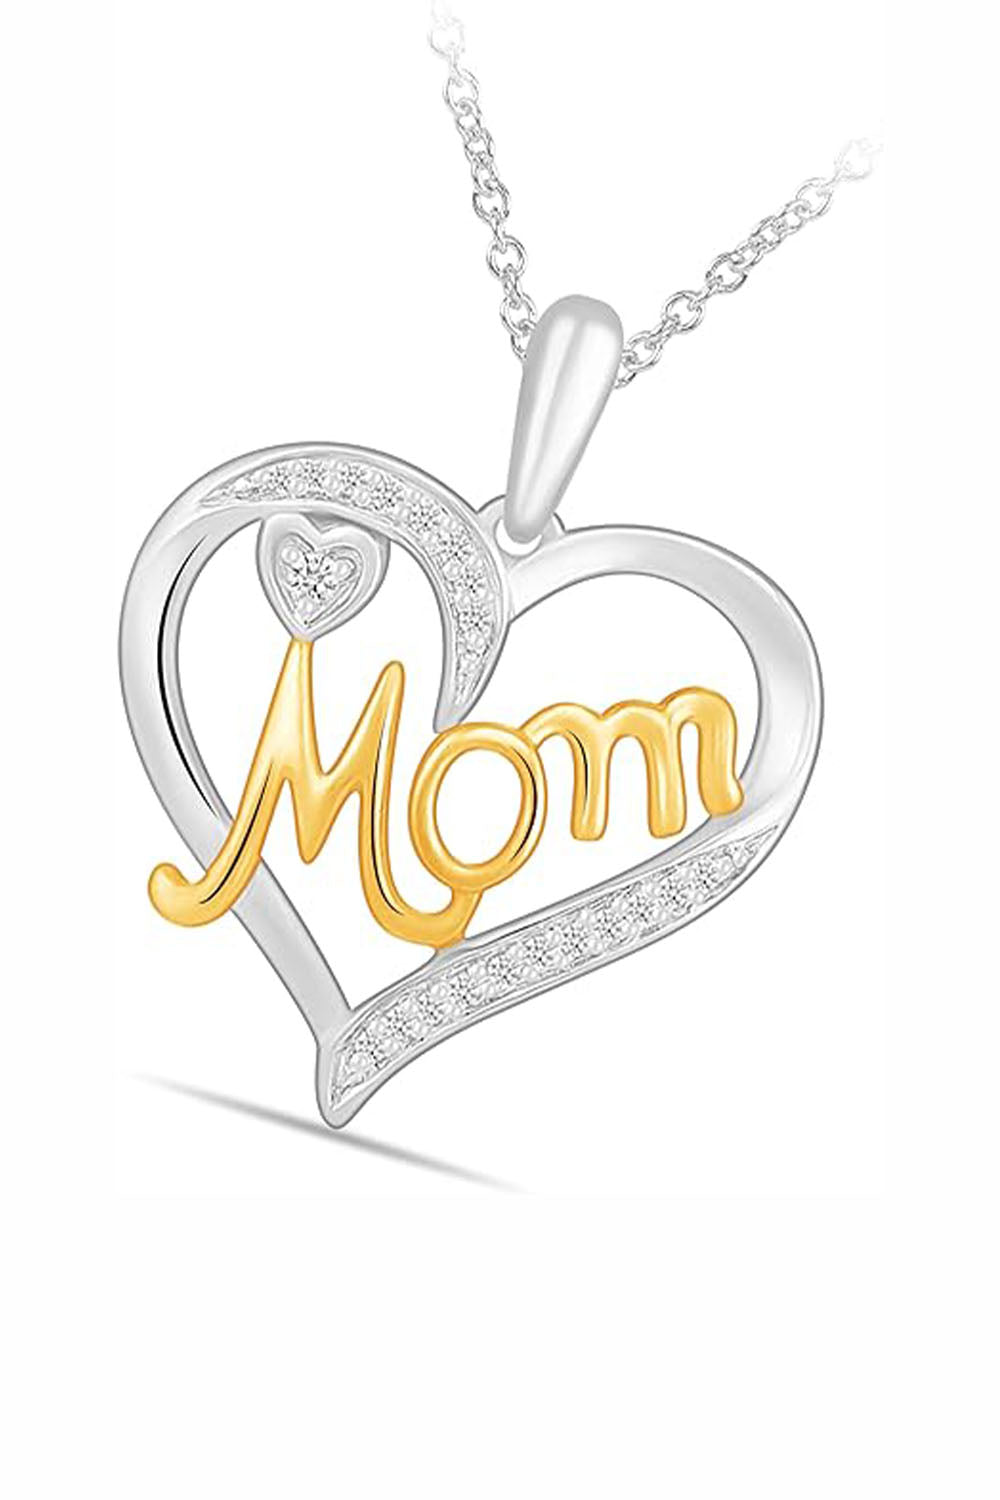 Yaathi 1/4 Carat Moissanite Double Heart Outline with Mom Pendant Necklace in 18k Tone Tone Gold Over Sterling Silver Jewellery.